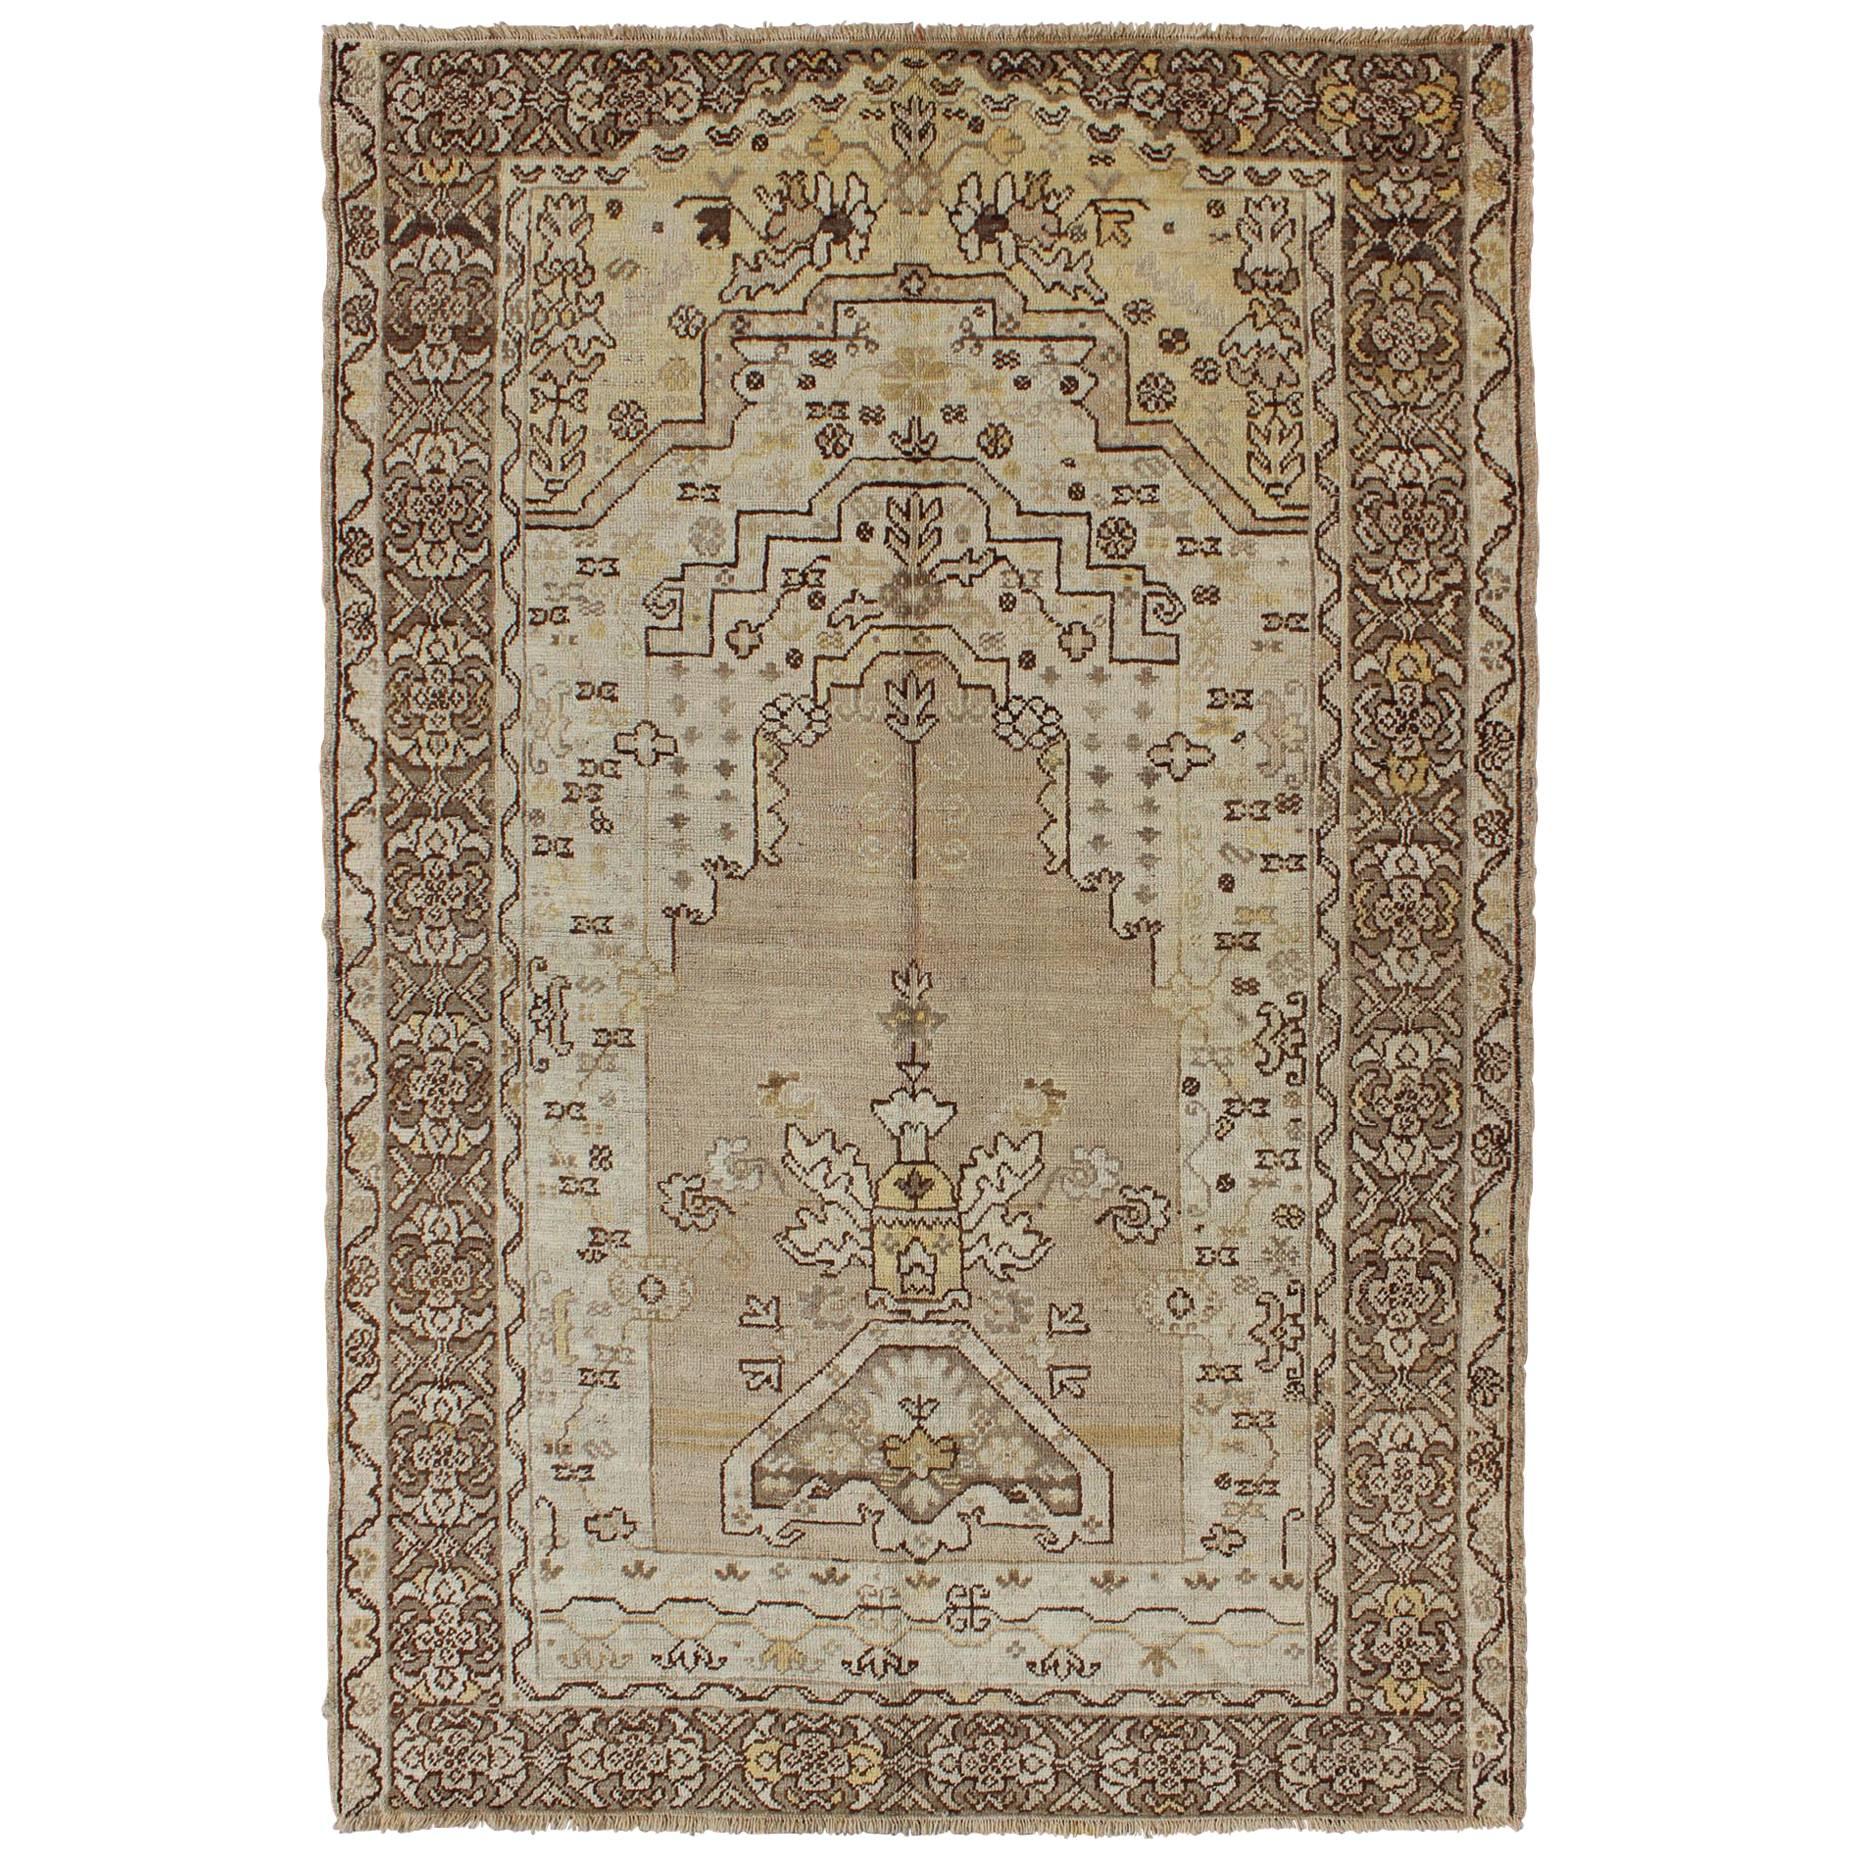 1920s Antique Turkish Oushak Prayer Rug with Flowers in Ivory, Taupe and Cream For Sale